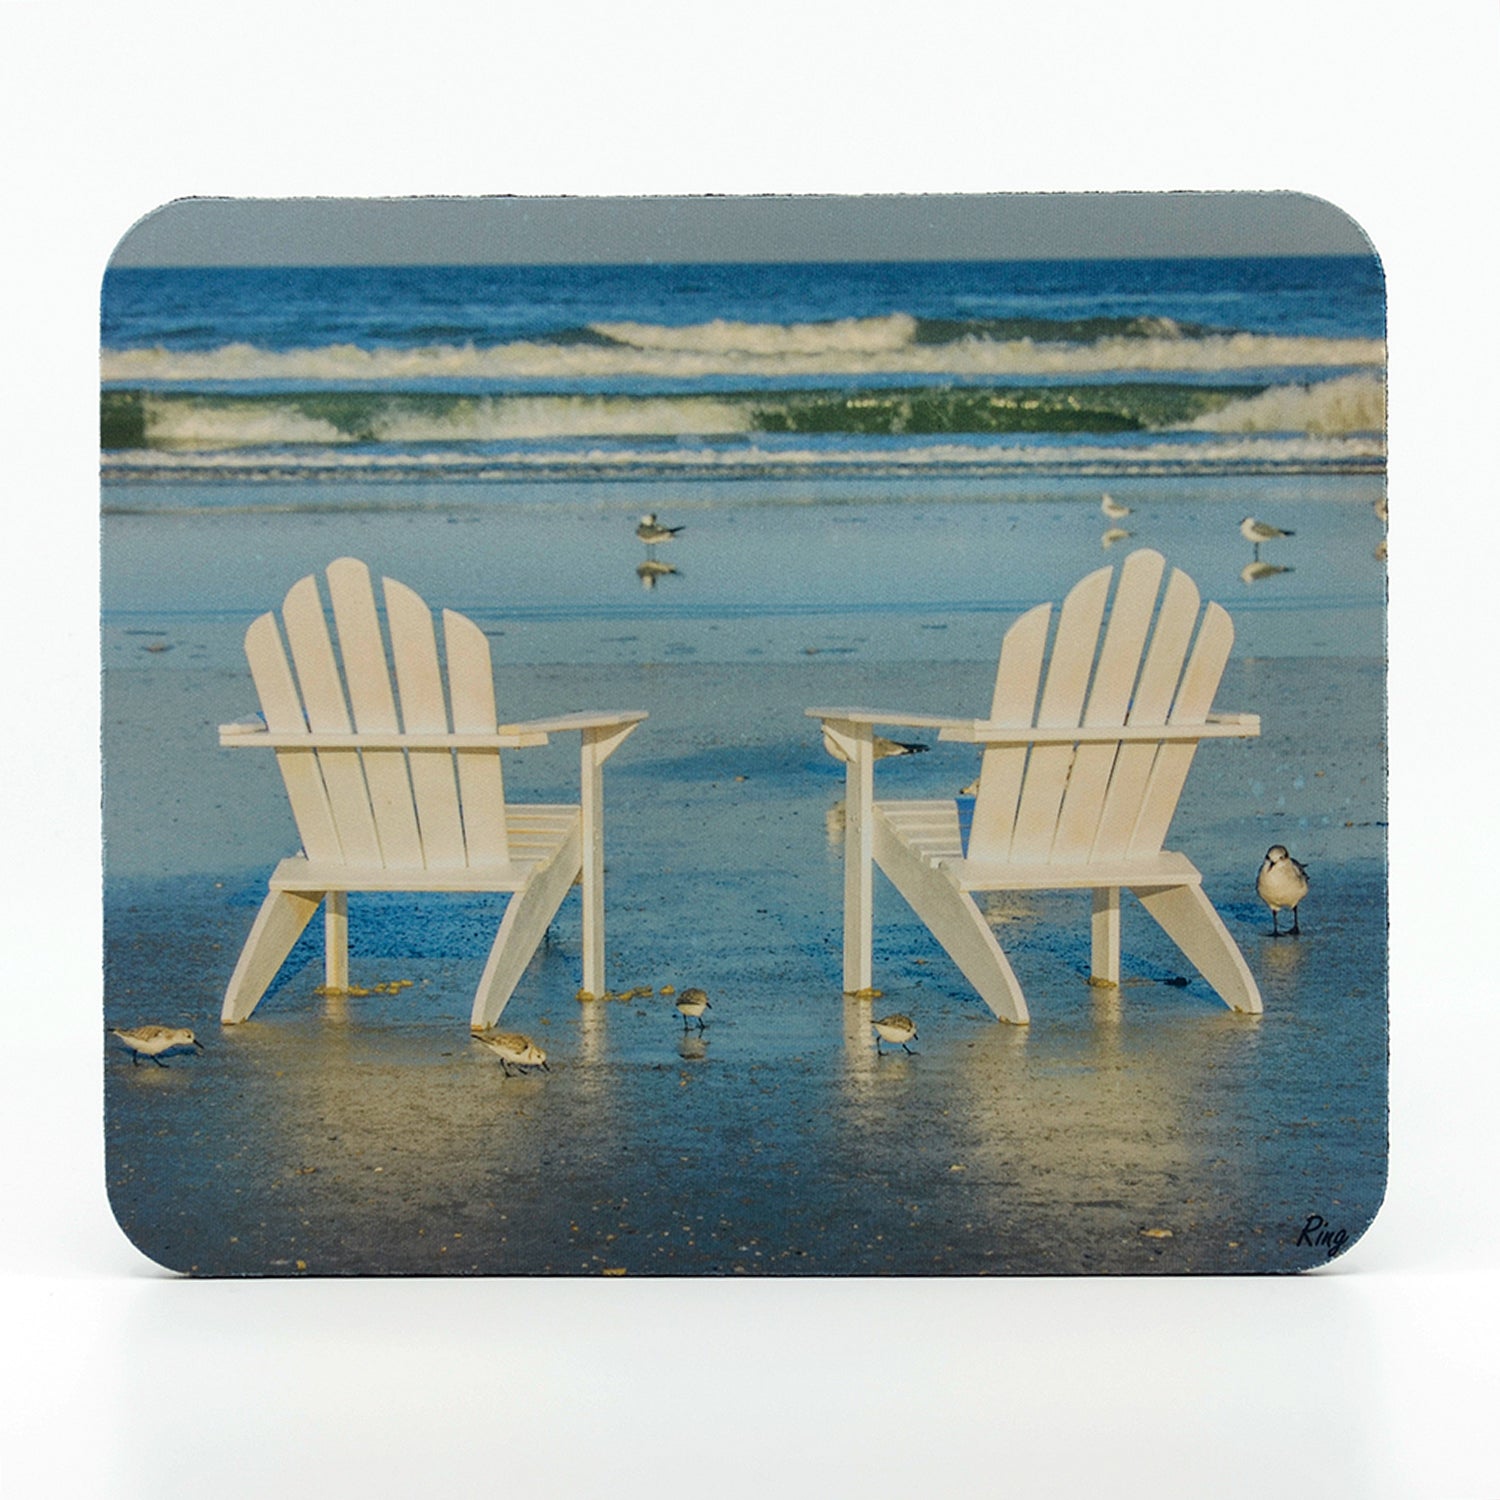 Two beach chairs image on a rectangle rubber mouse pad